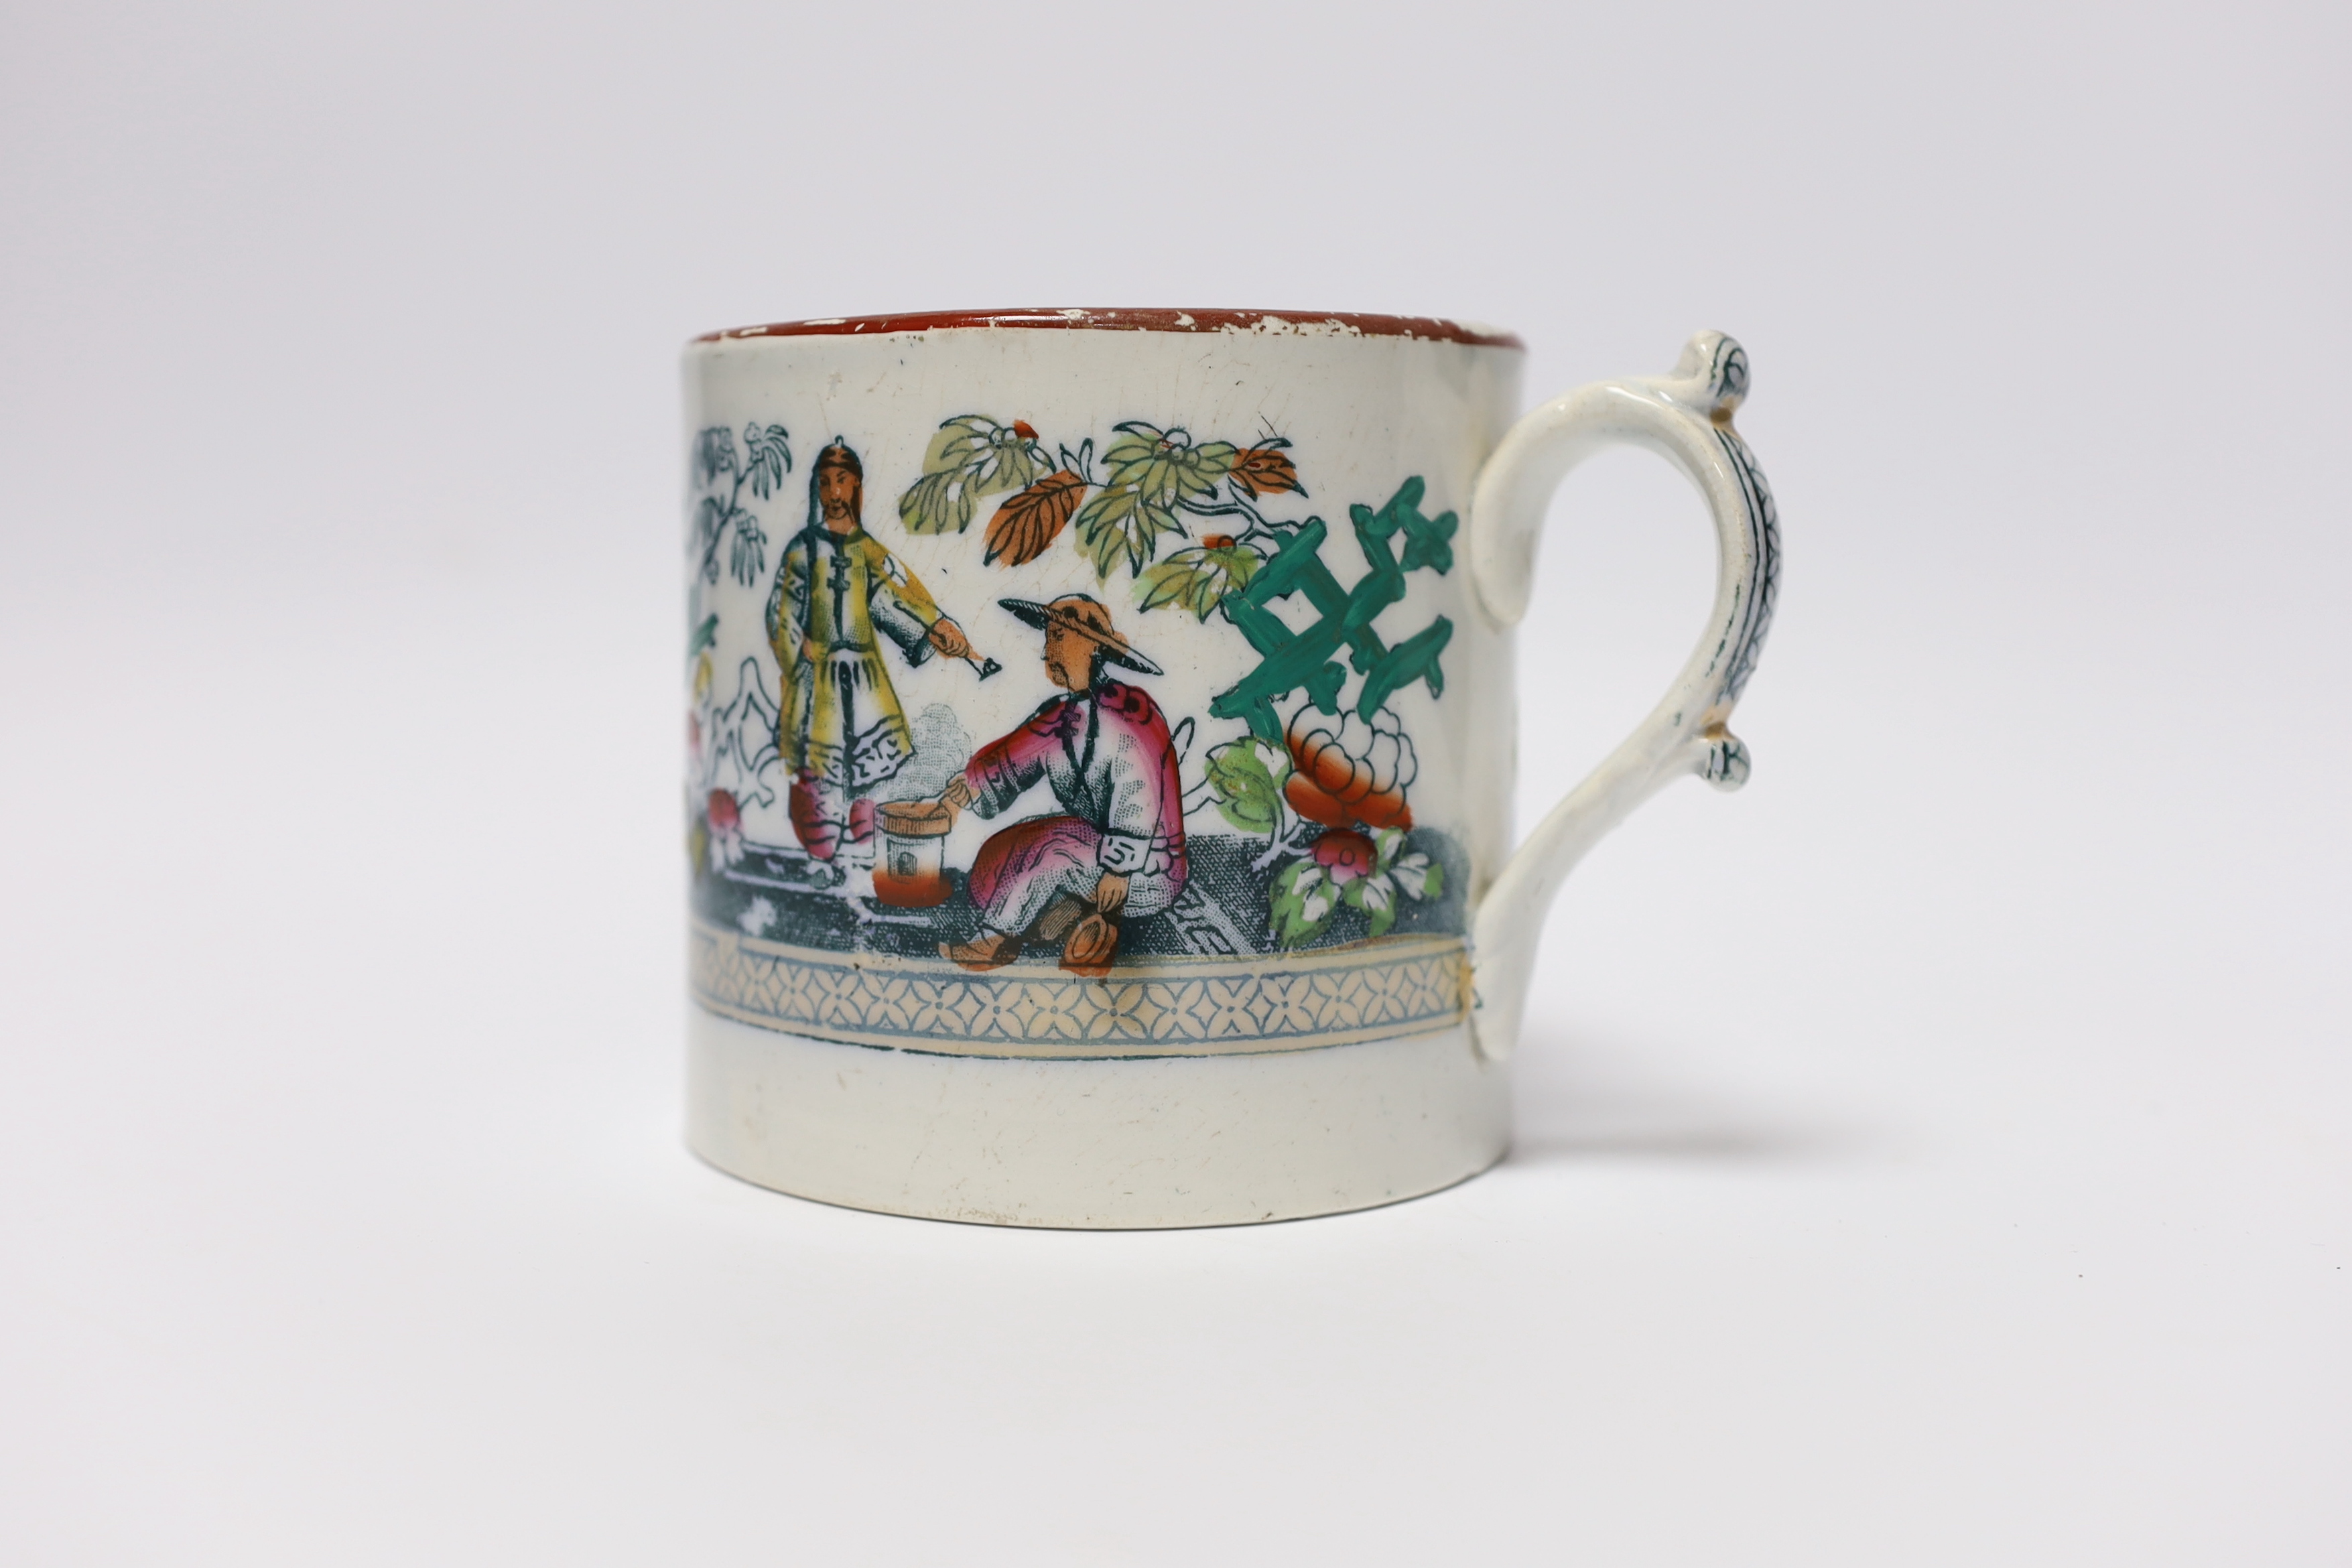 A mid 19th century Staffordshire ironstone cylindrical large tankard decorated with Chinese figures and motifs (E and H), 10cm